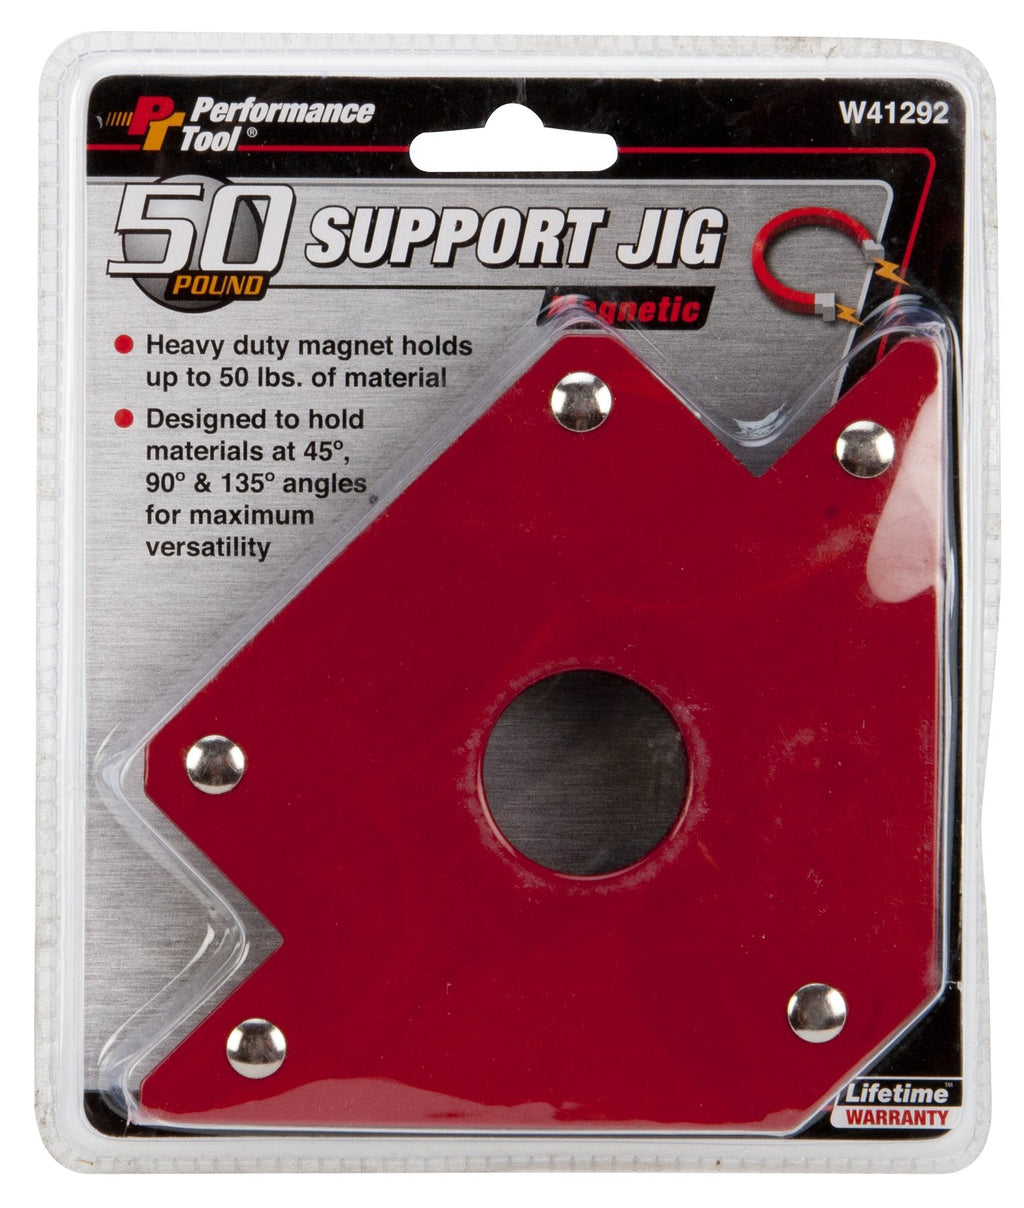 Performance Tool W41292 Magnetic Welding Support Jig (50lb) Magnetic Jig (50lb)